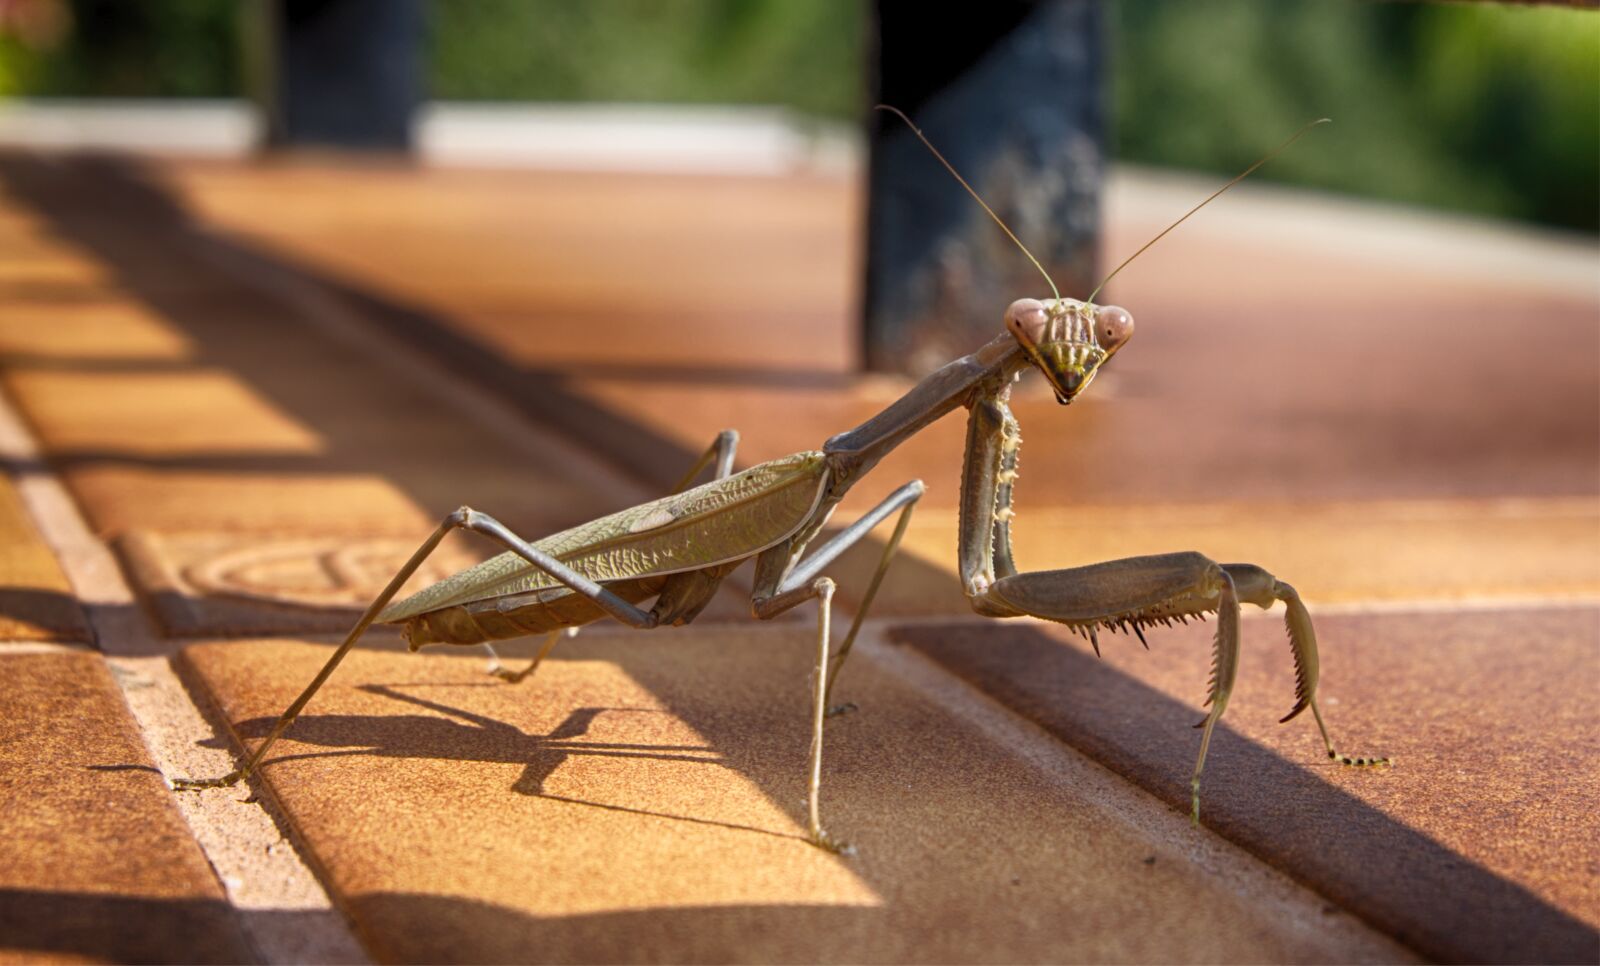 Fujifilm X-A2 sample photo. Prying mantis, mantis, insect photography